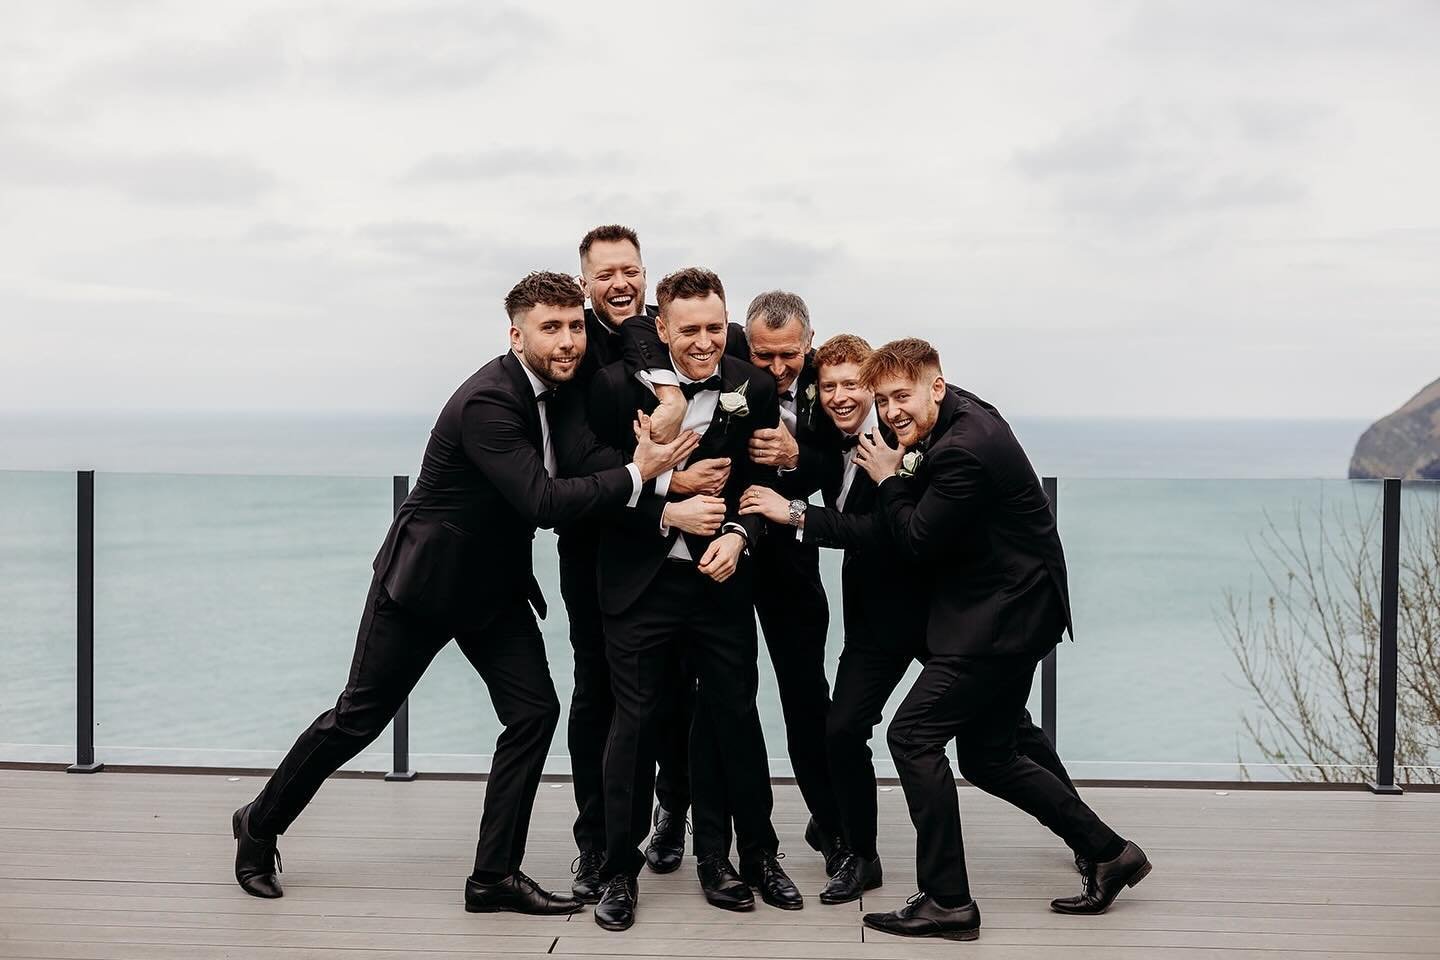 🎉Lads lads lads 🎉
The evening turnaround on your wedding day is the perfect time to get your bridesmaids and groomsmen out for some fun shots (especially if they&rsquo;ve had a drink 🍻) 
.
.
.
.
#sandycove #sandycoveweddings #sandycoveweddingphoto